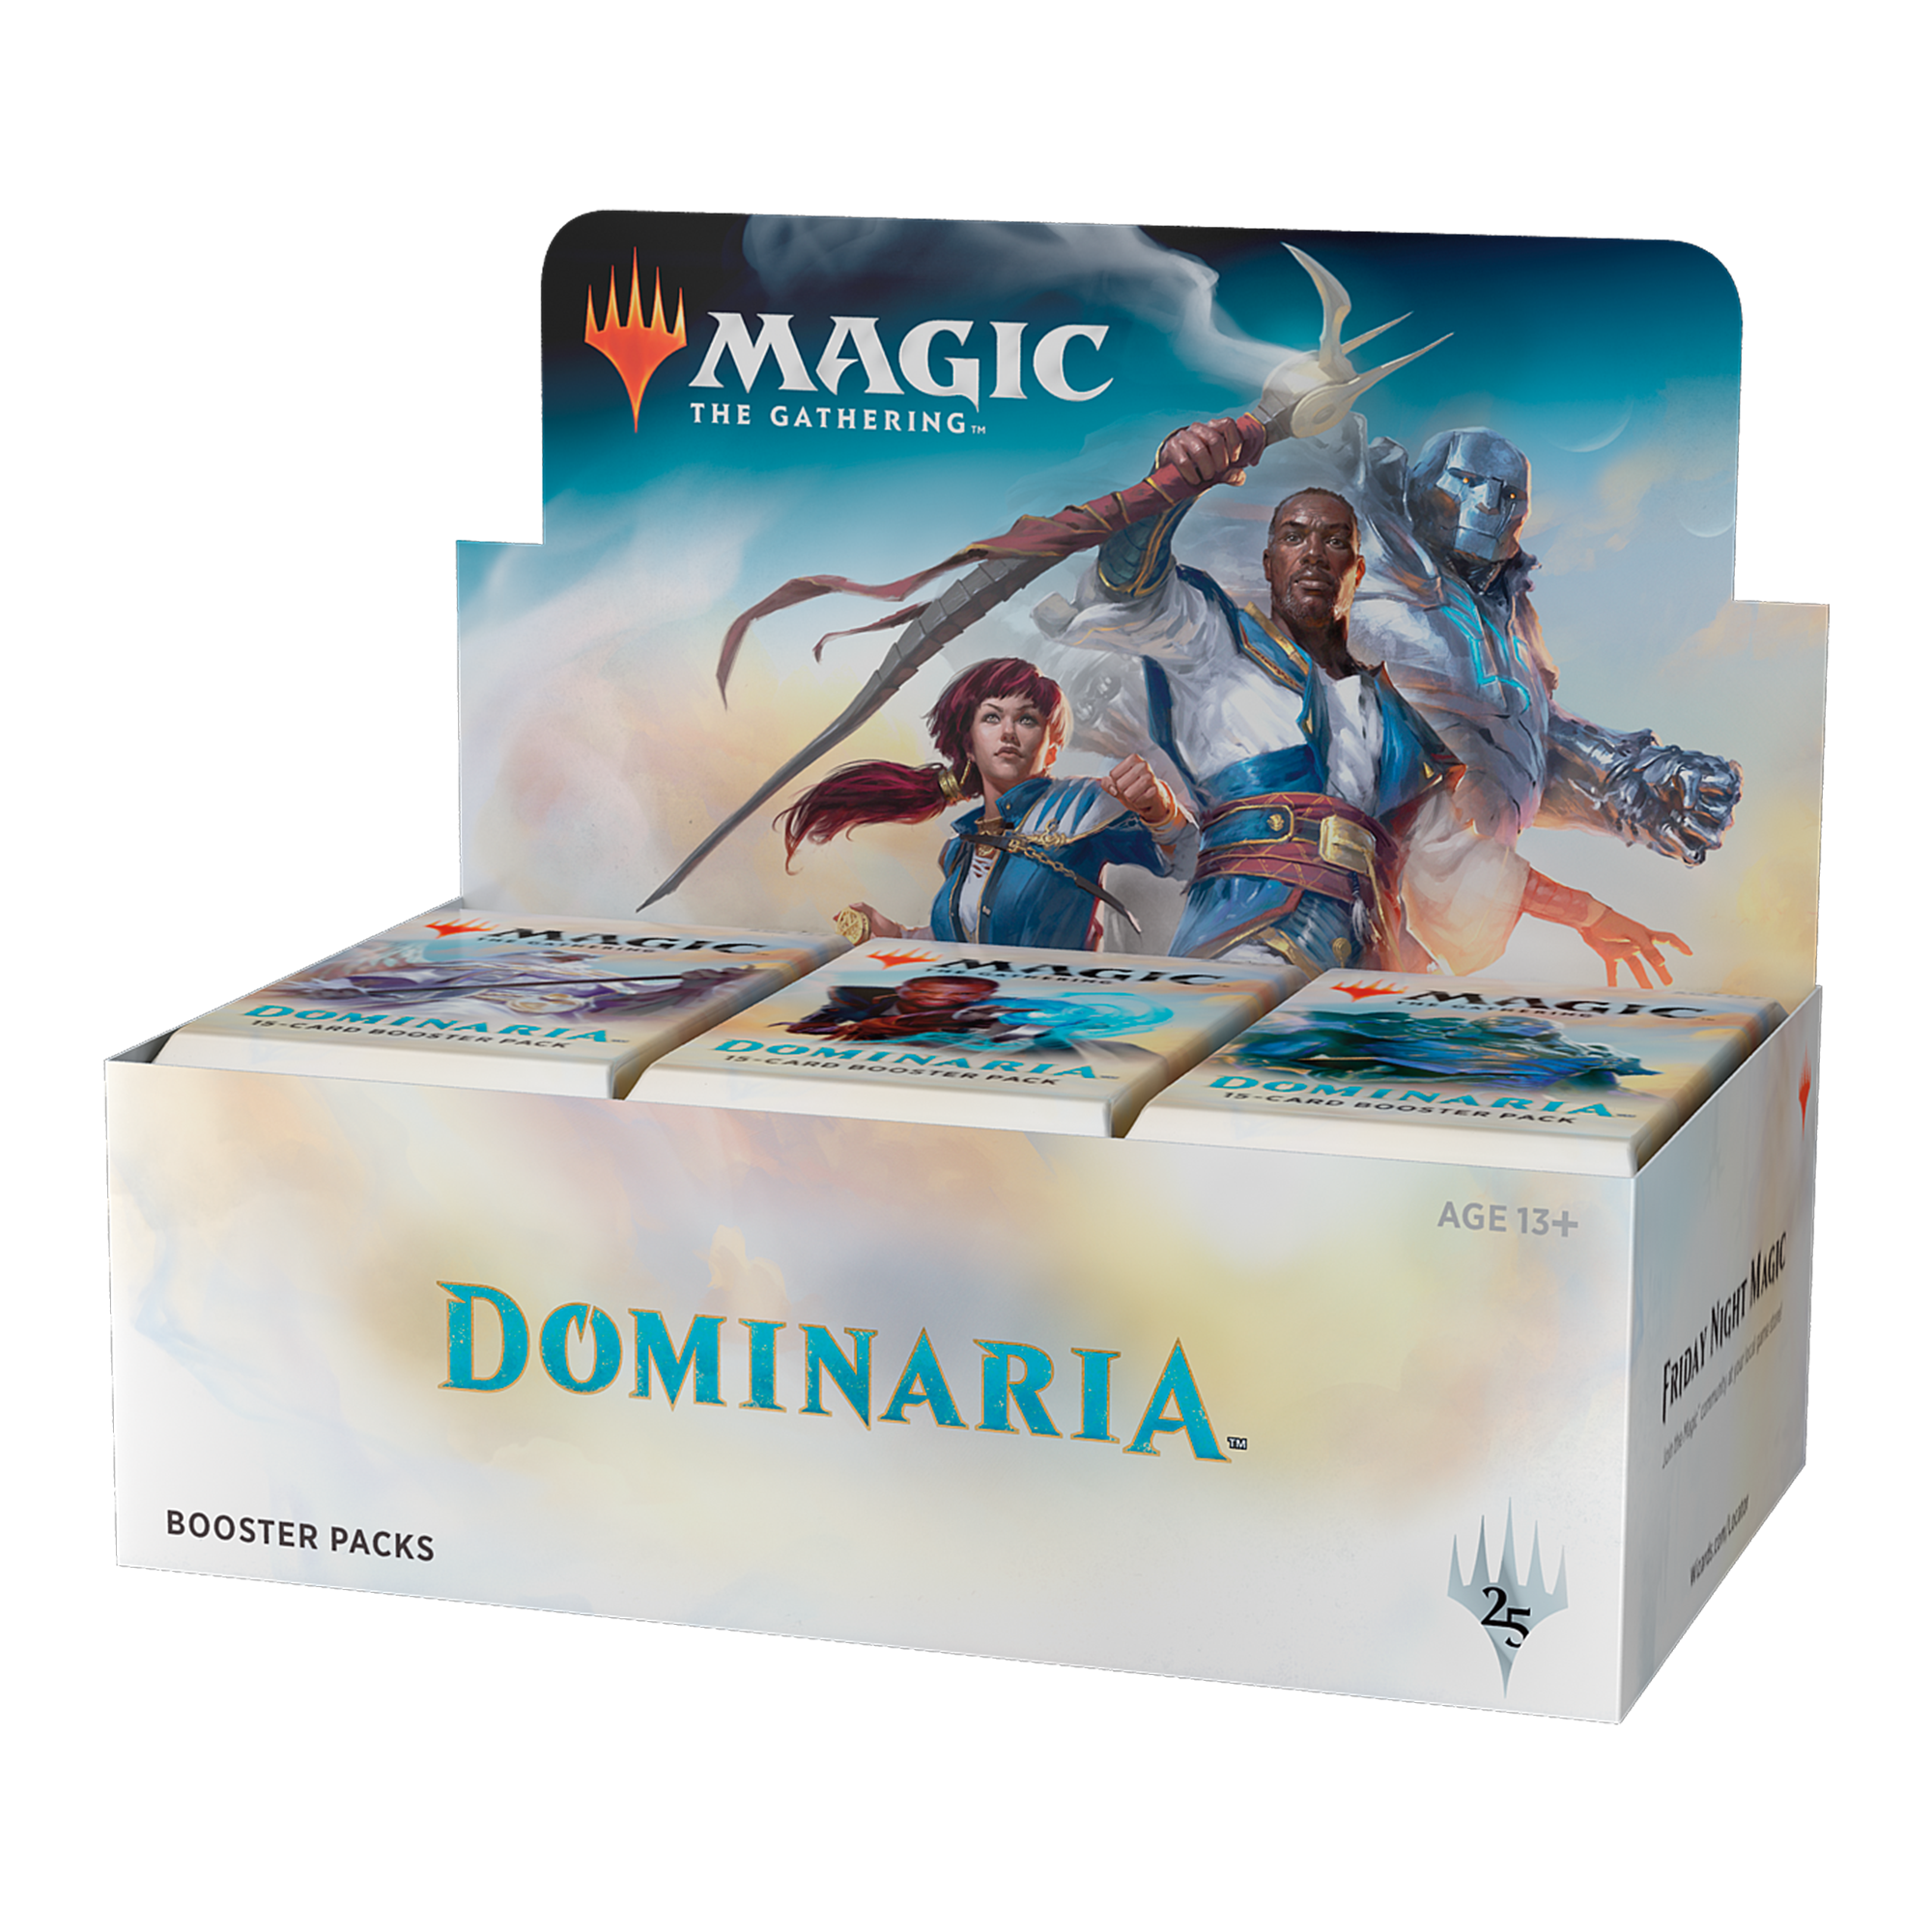 MAGIC FRENCH DOMINARIA French BOOSTER BOX FREE SAME DAY PRIORITY SHIPPING 